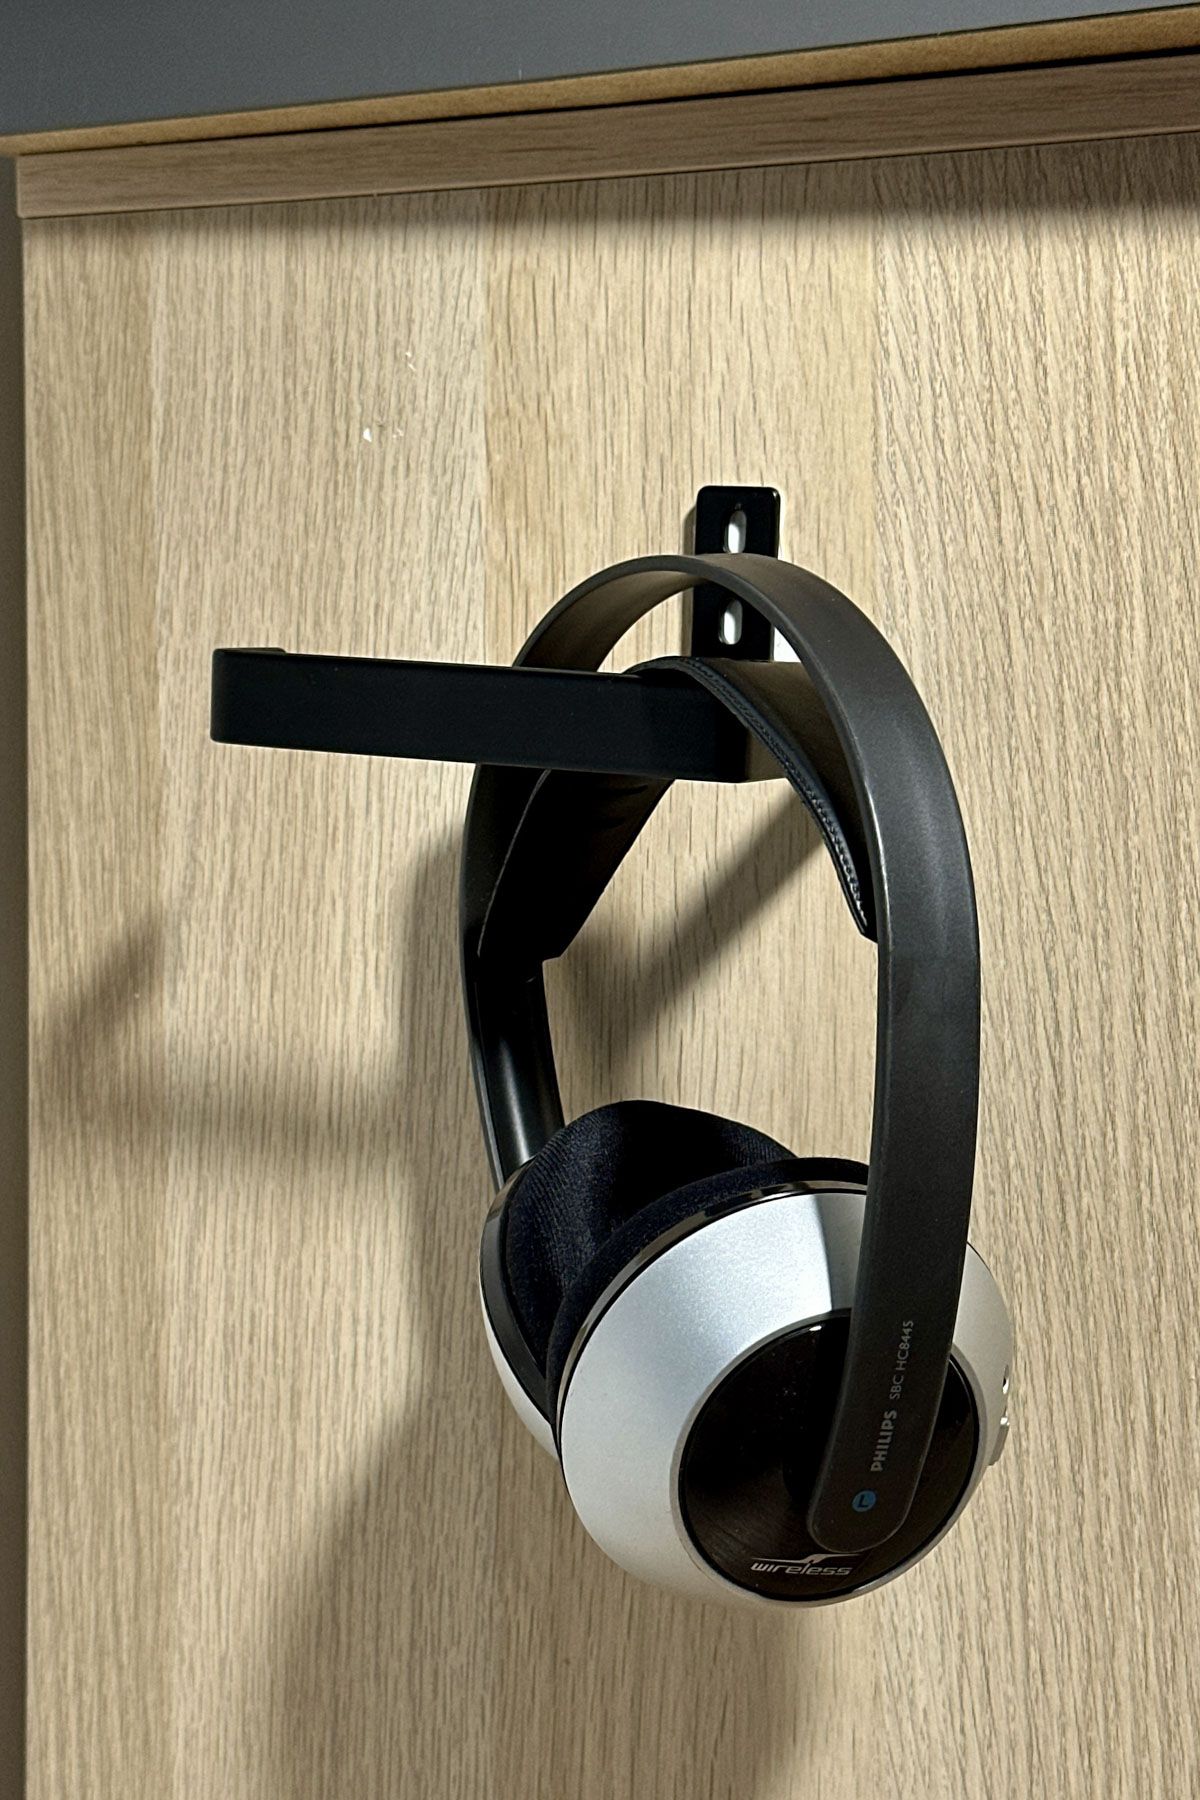 Use A Toilet Paper Roll Holder To Hang Your Headphones By The Desk